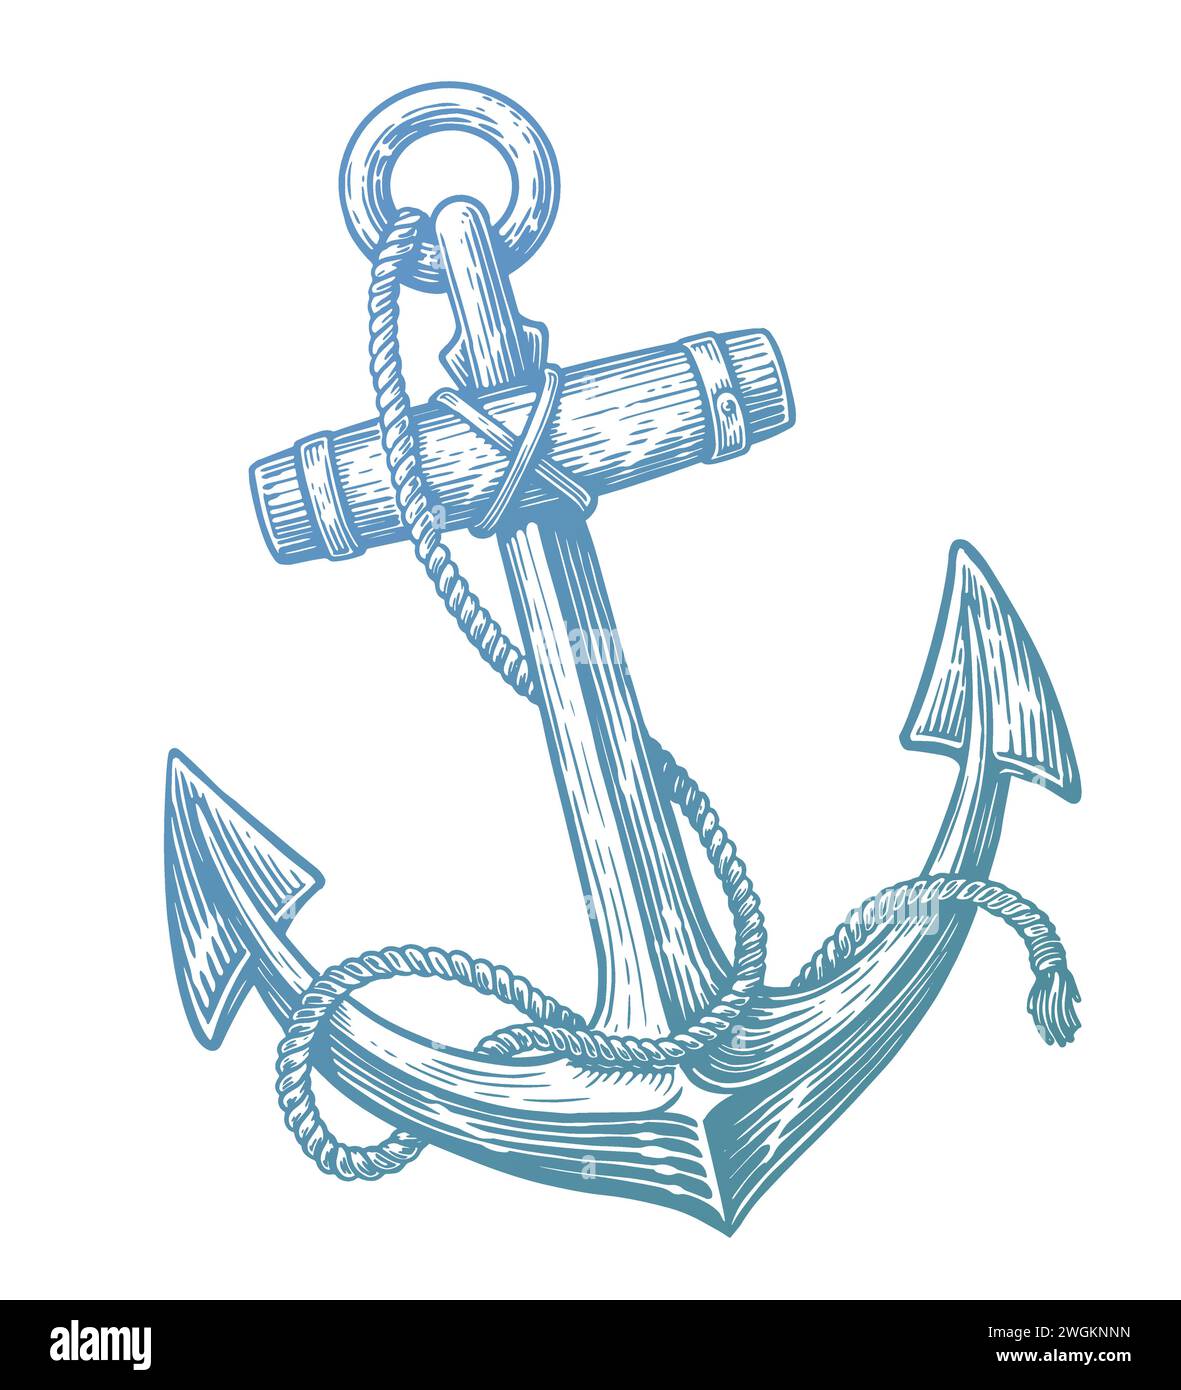 Ship anchor and rope. Hand drawn sketch vintage vector illustration Stock Vector